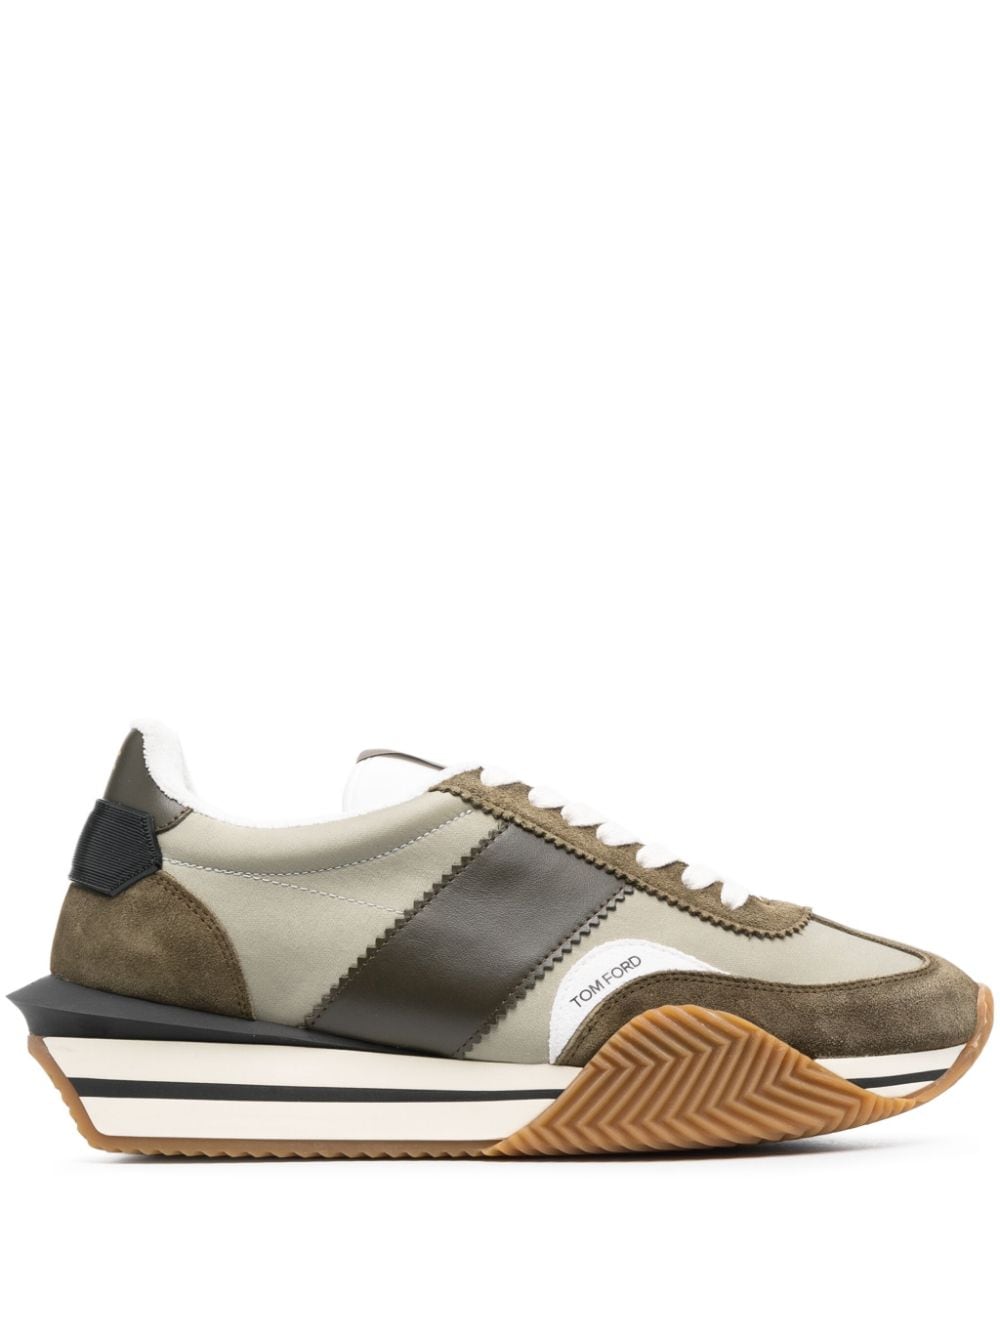 TOM FORD logo-patch Sneakers - Farfetch